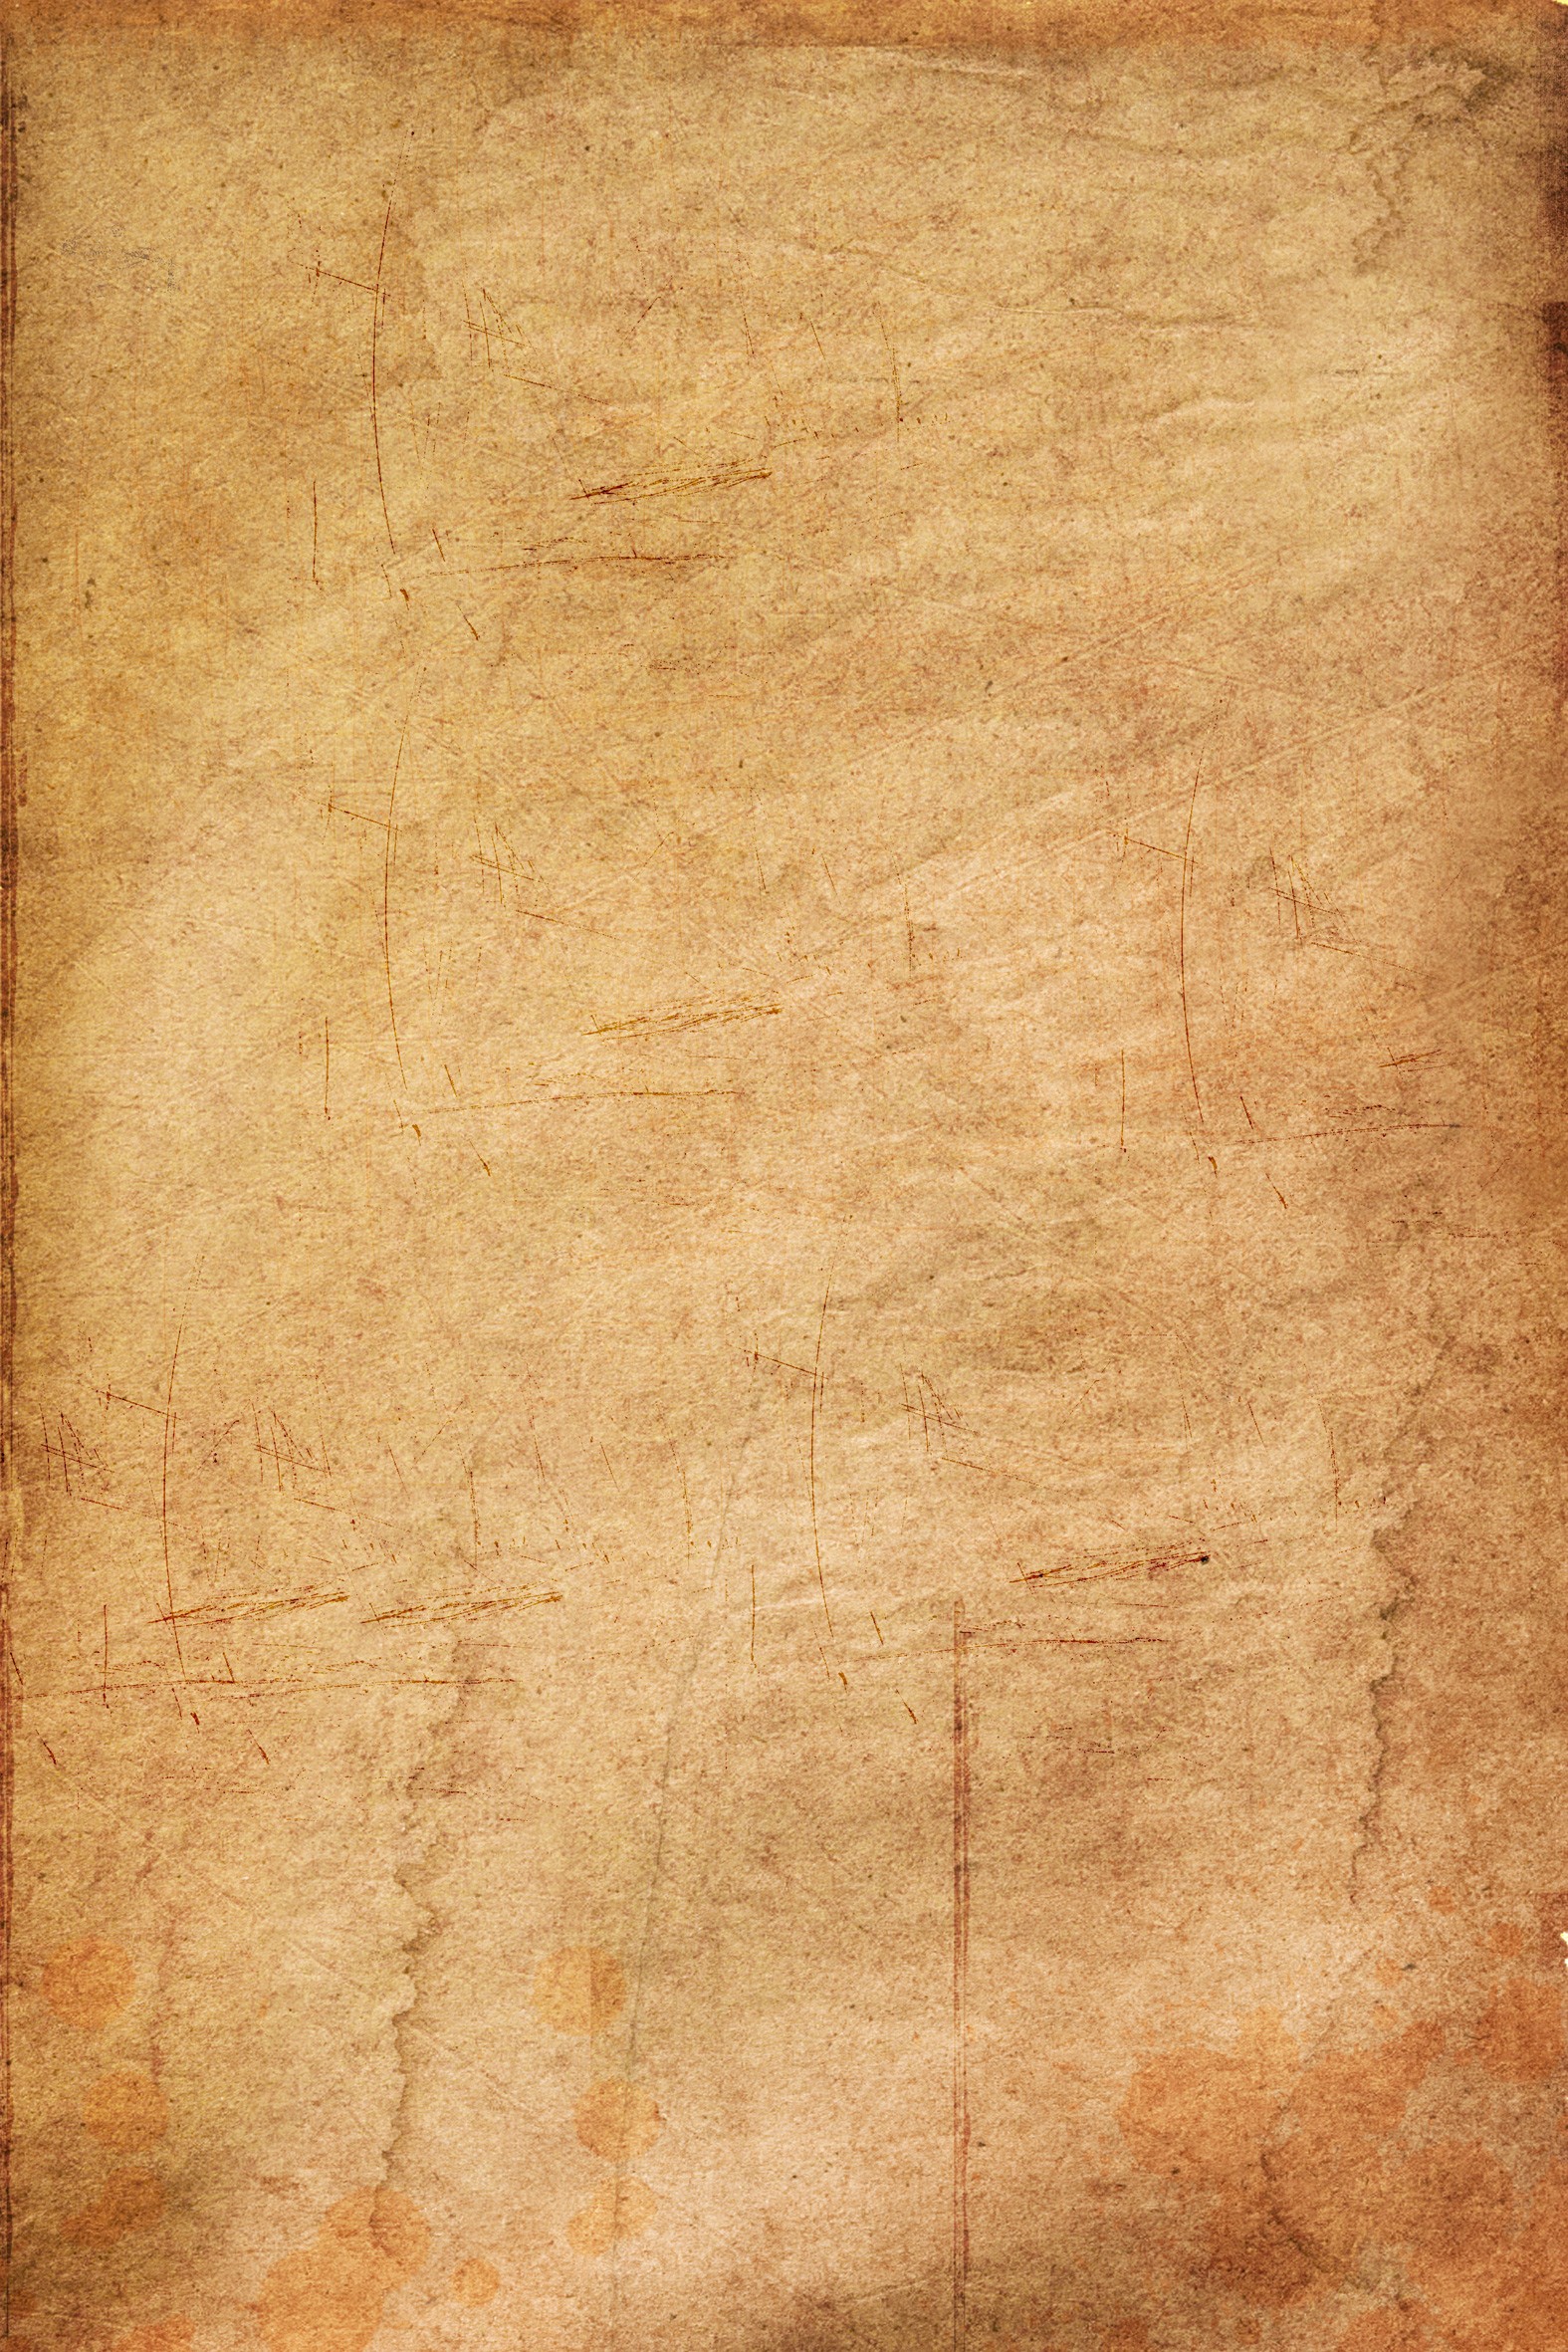 Papyrus background ·① Download free beautiful High Resolution